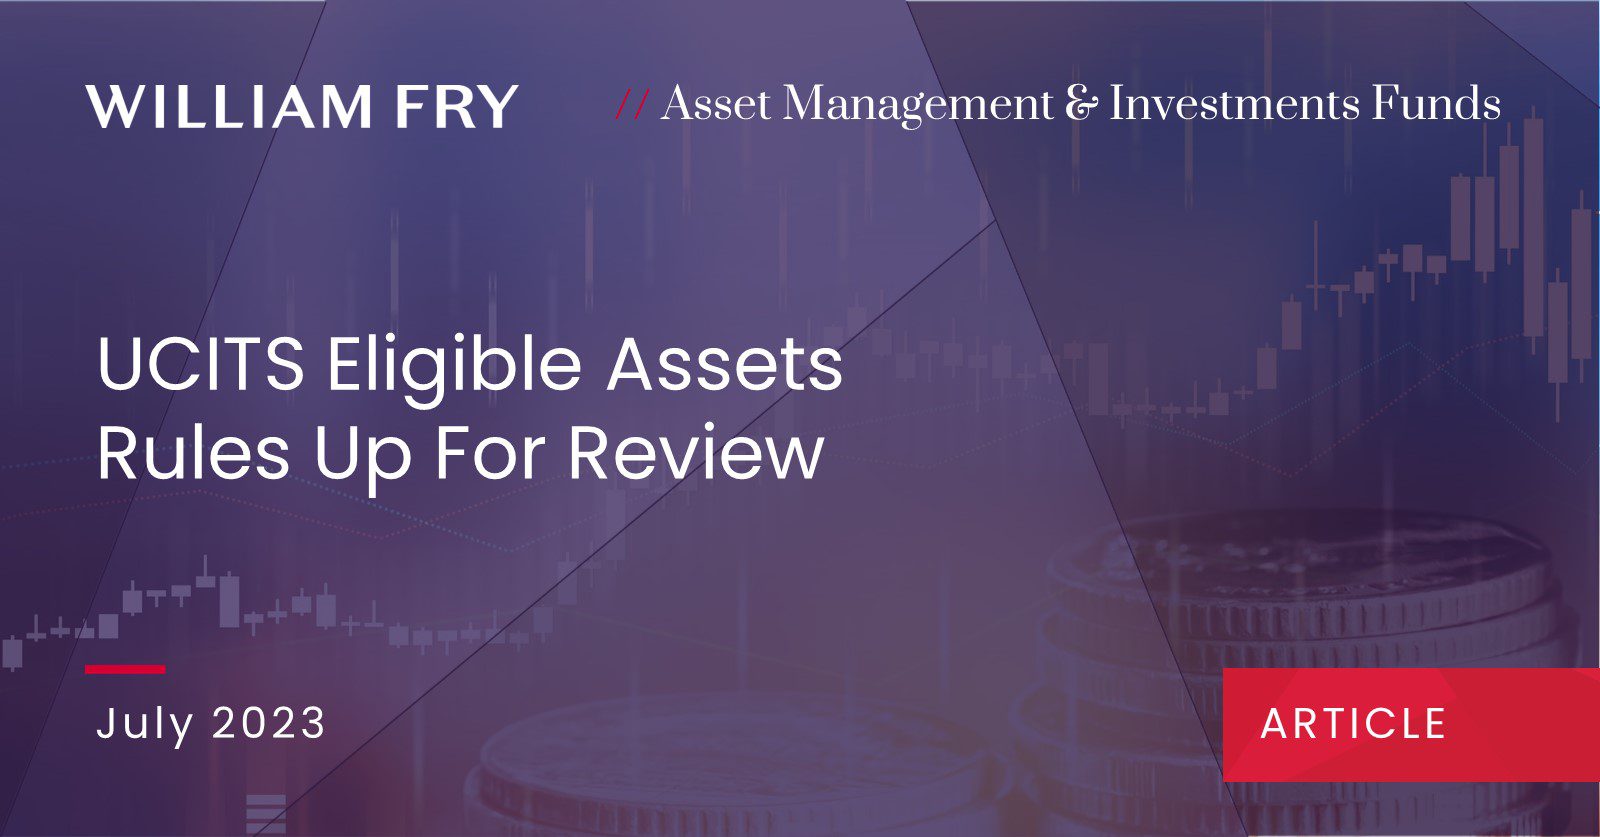 UCITS Eligible Assets Rules Up For Review